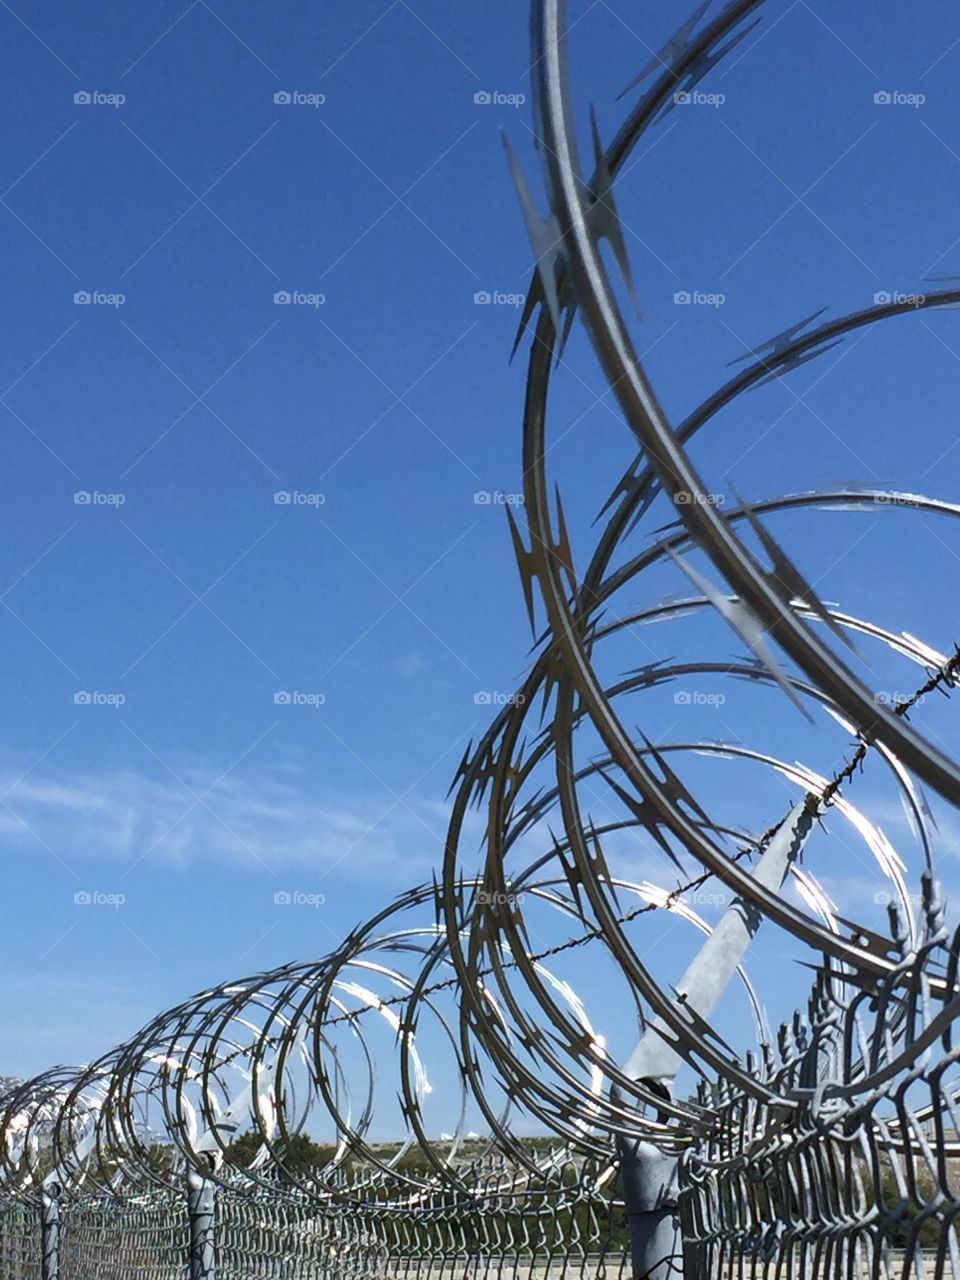 Razor wire fence against clear sky